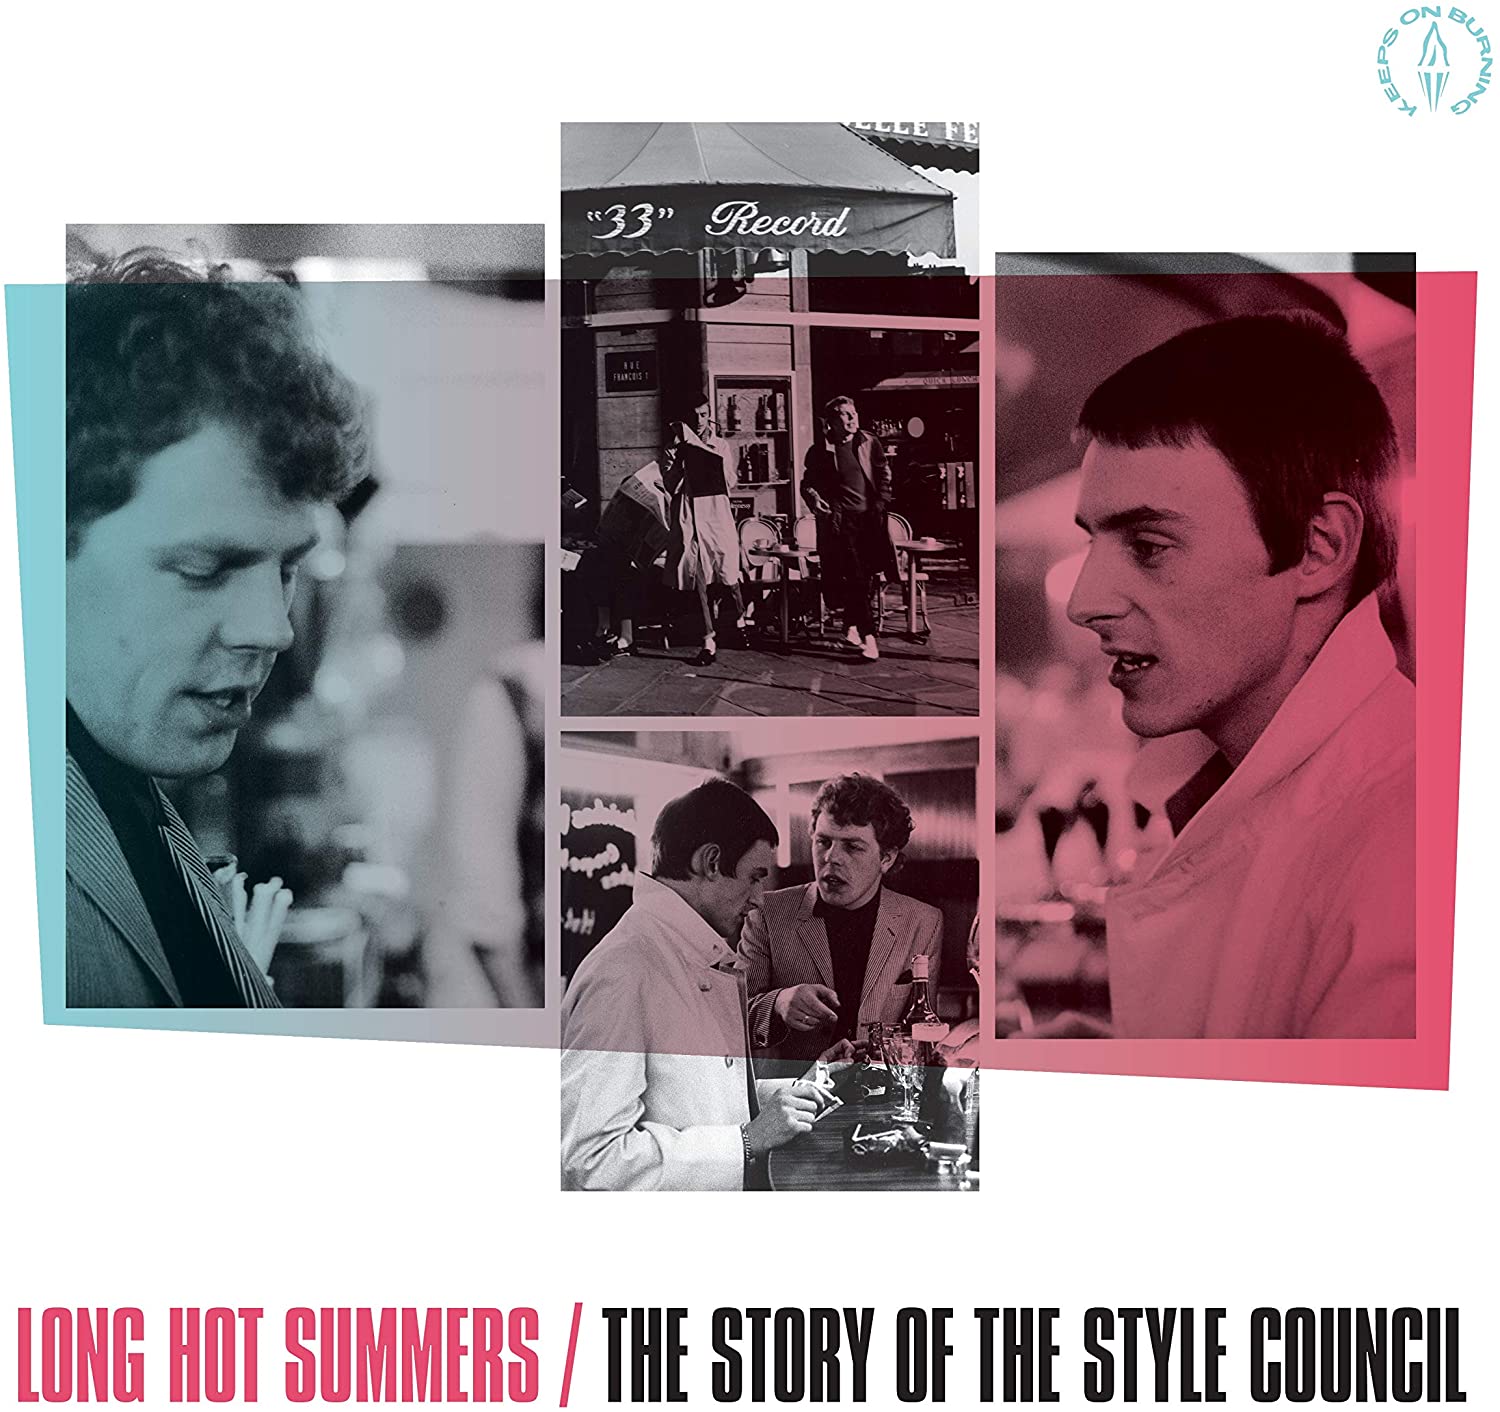 The Style Council / Long Hot Summers: The Story of The Style Council